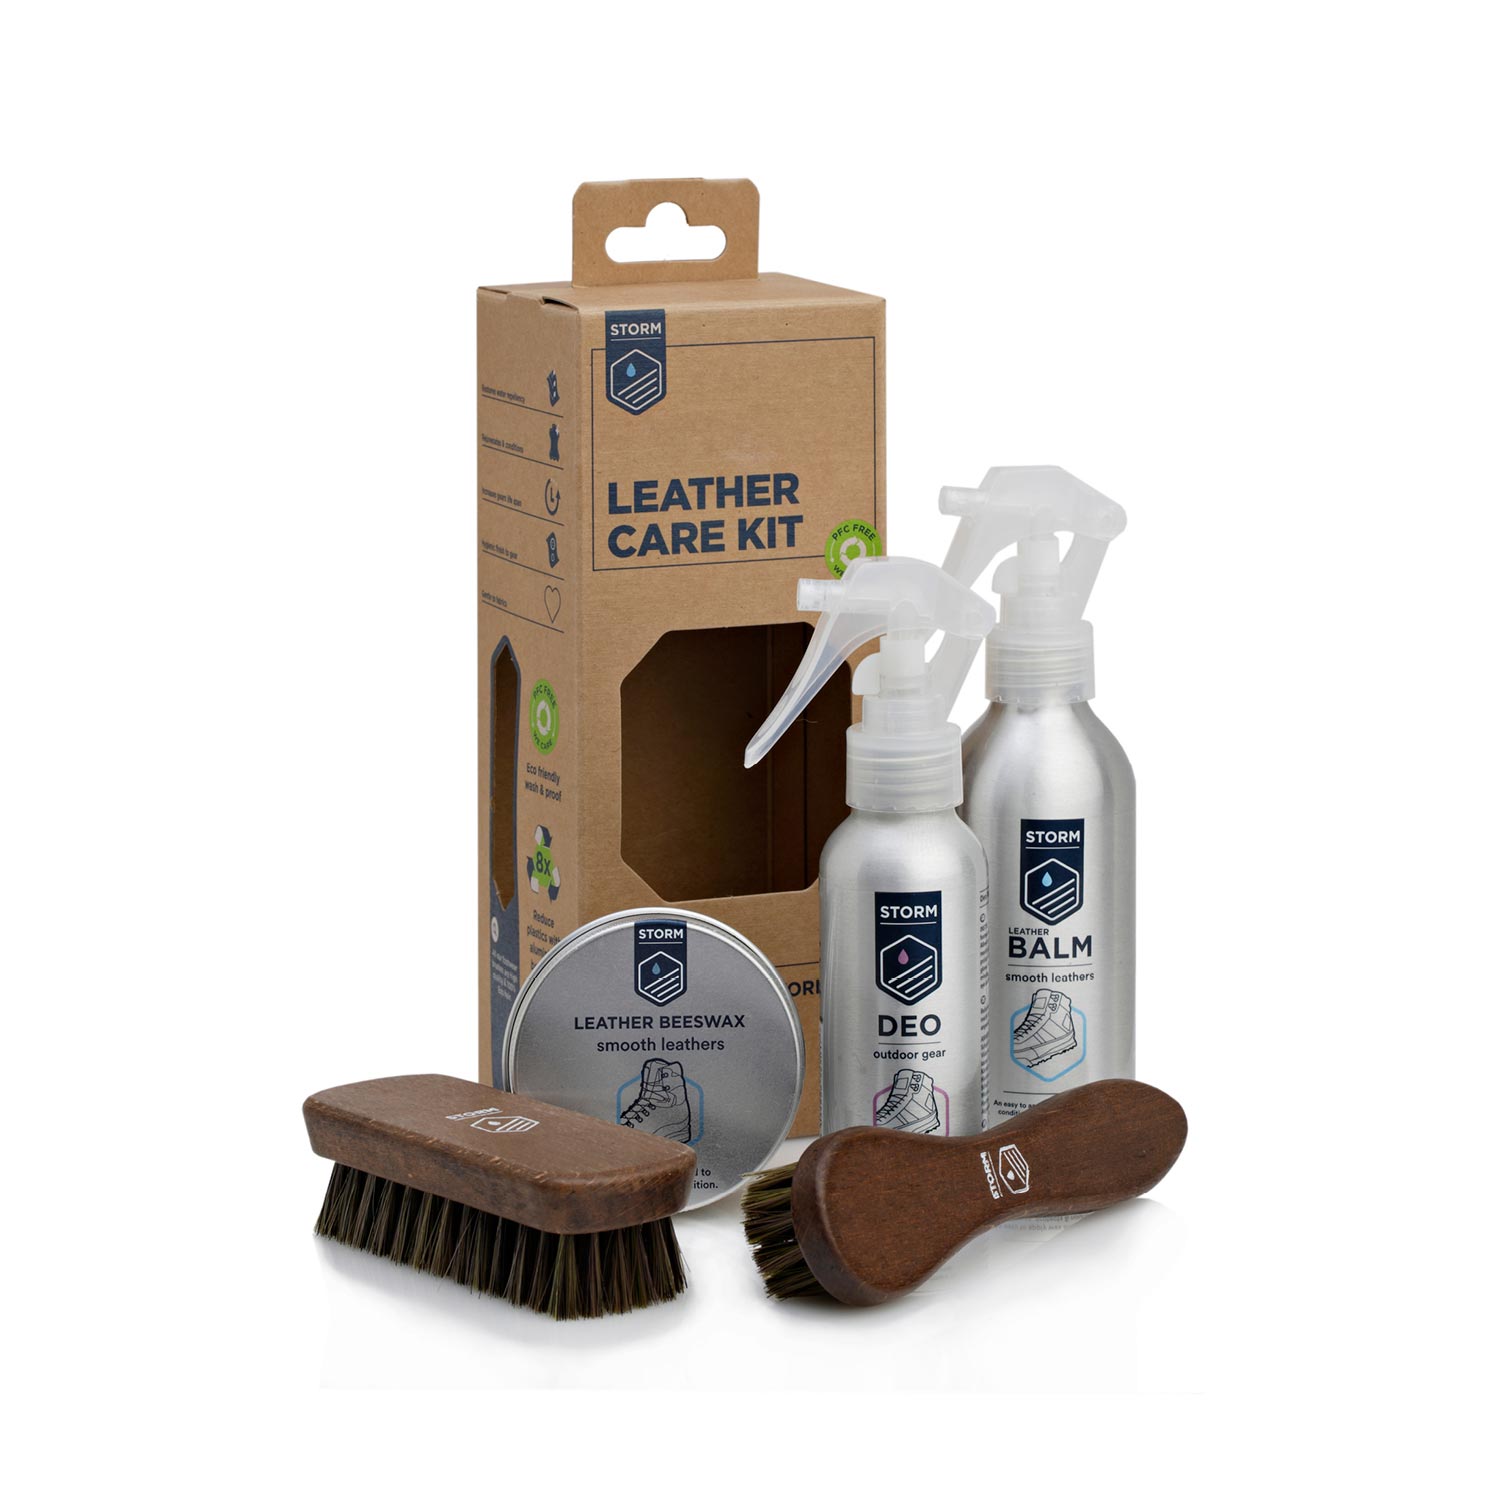 Storm - leather footwear care kit